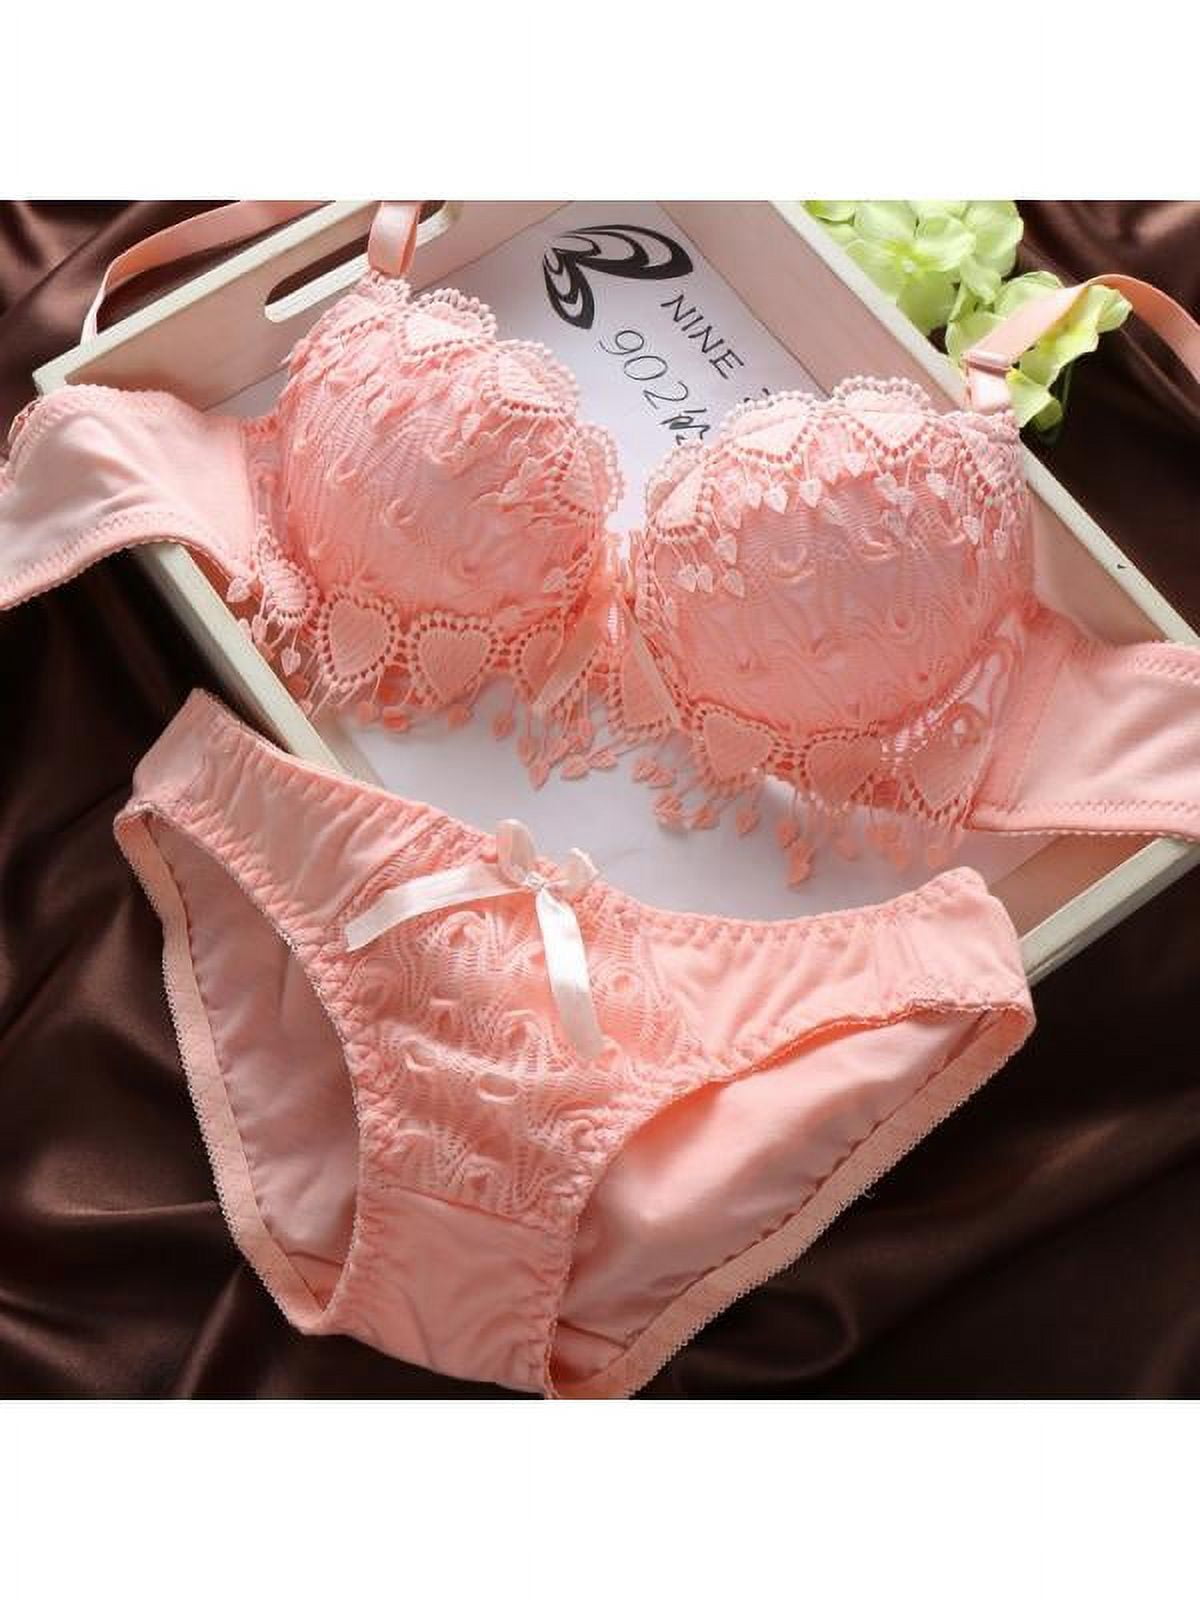 Sexy Lace Lingerie Set Embroidery Deep V Padded Extreme Push Up Bra Panty  Sets 